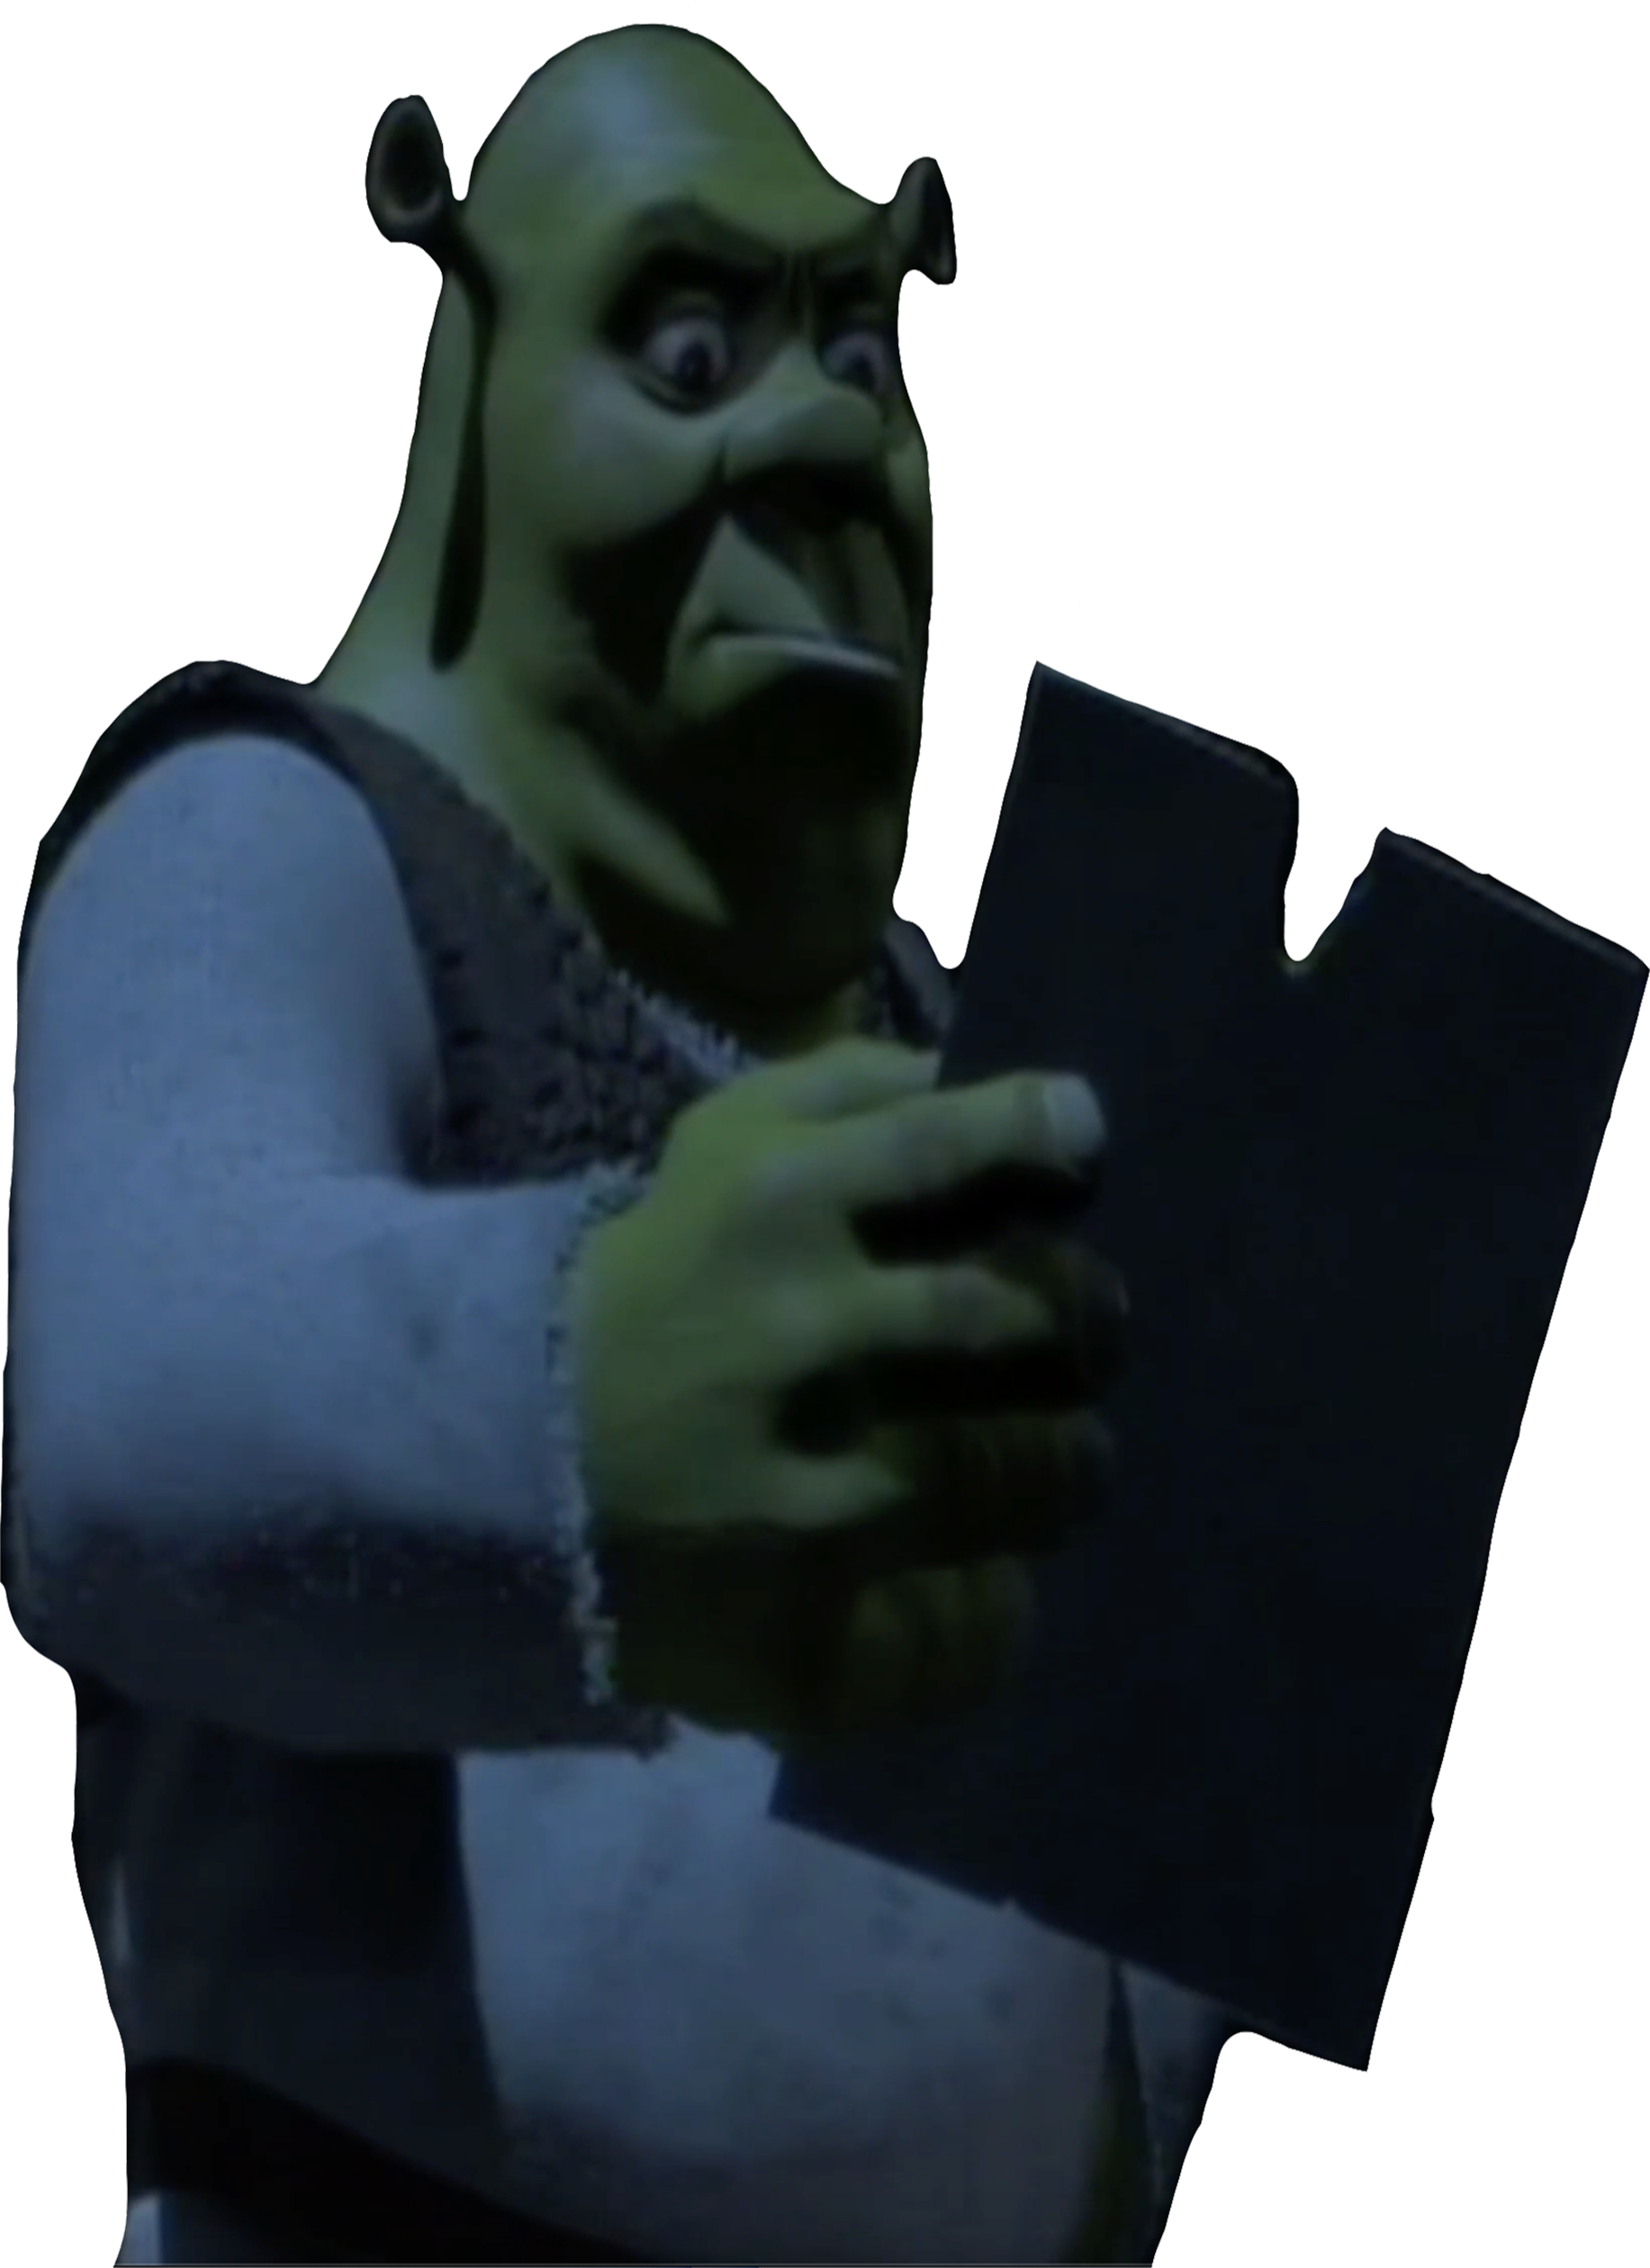 Shrek holding up a Wanted poster vector by HomerSimpson1983 on DeviantArt